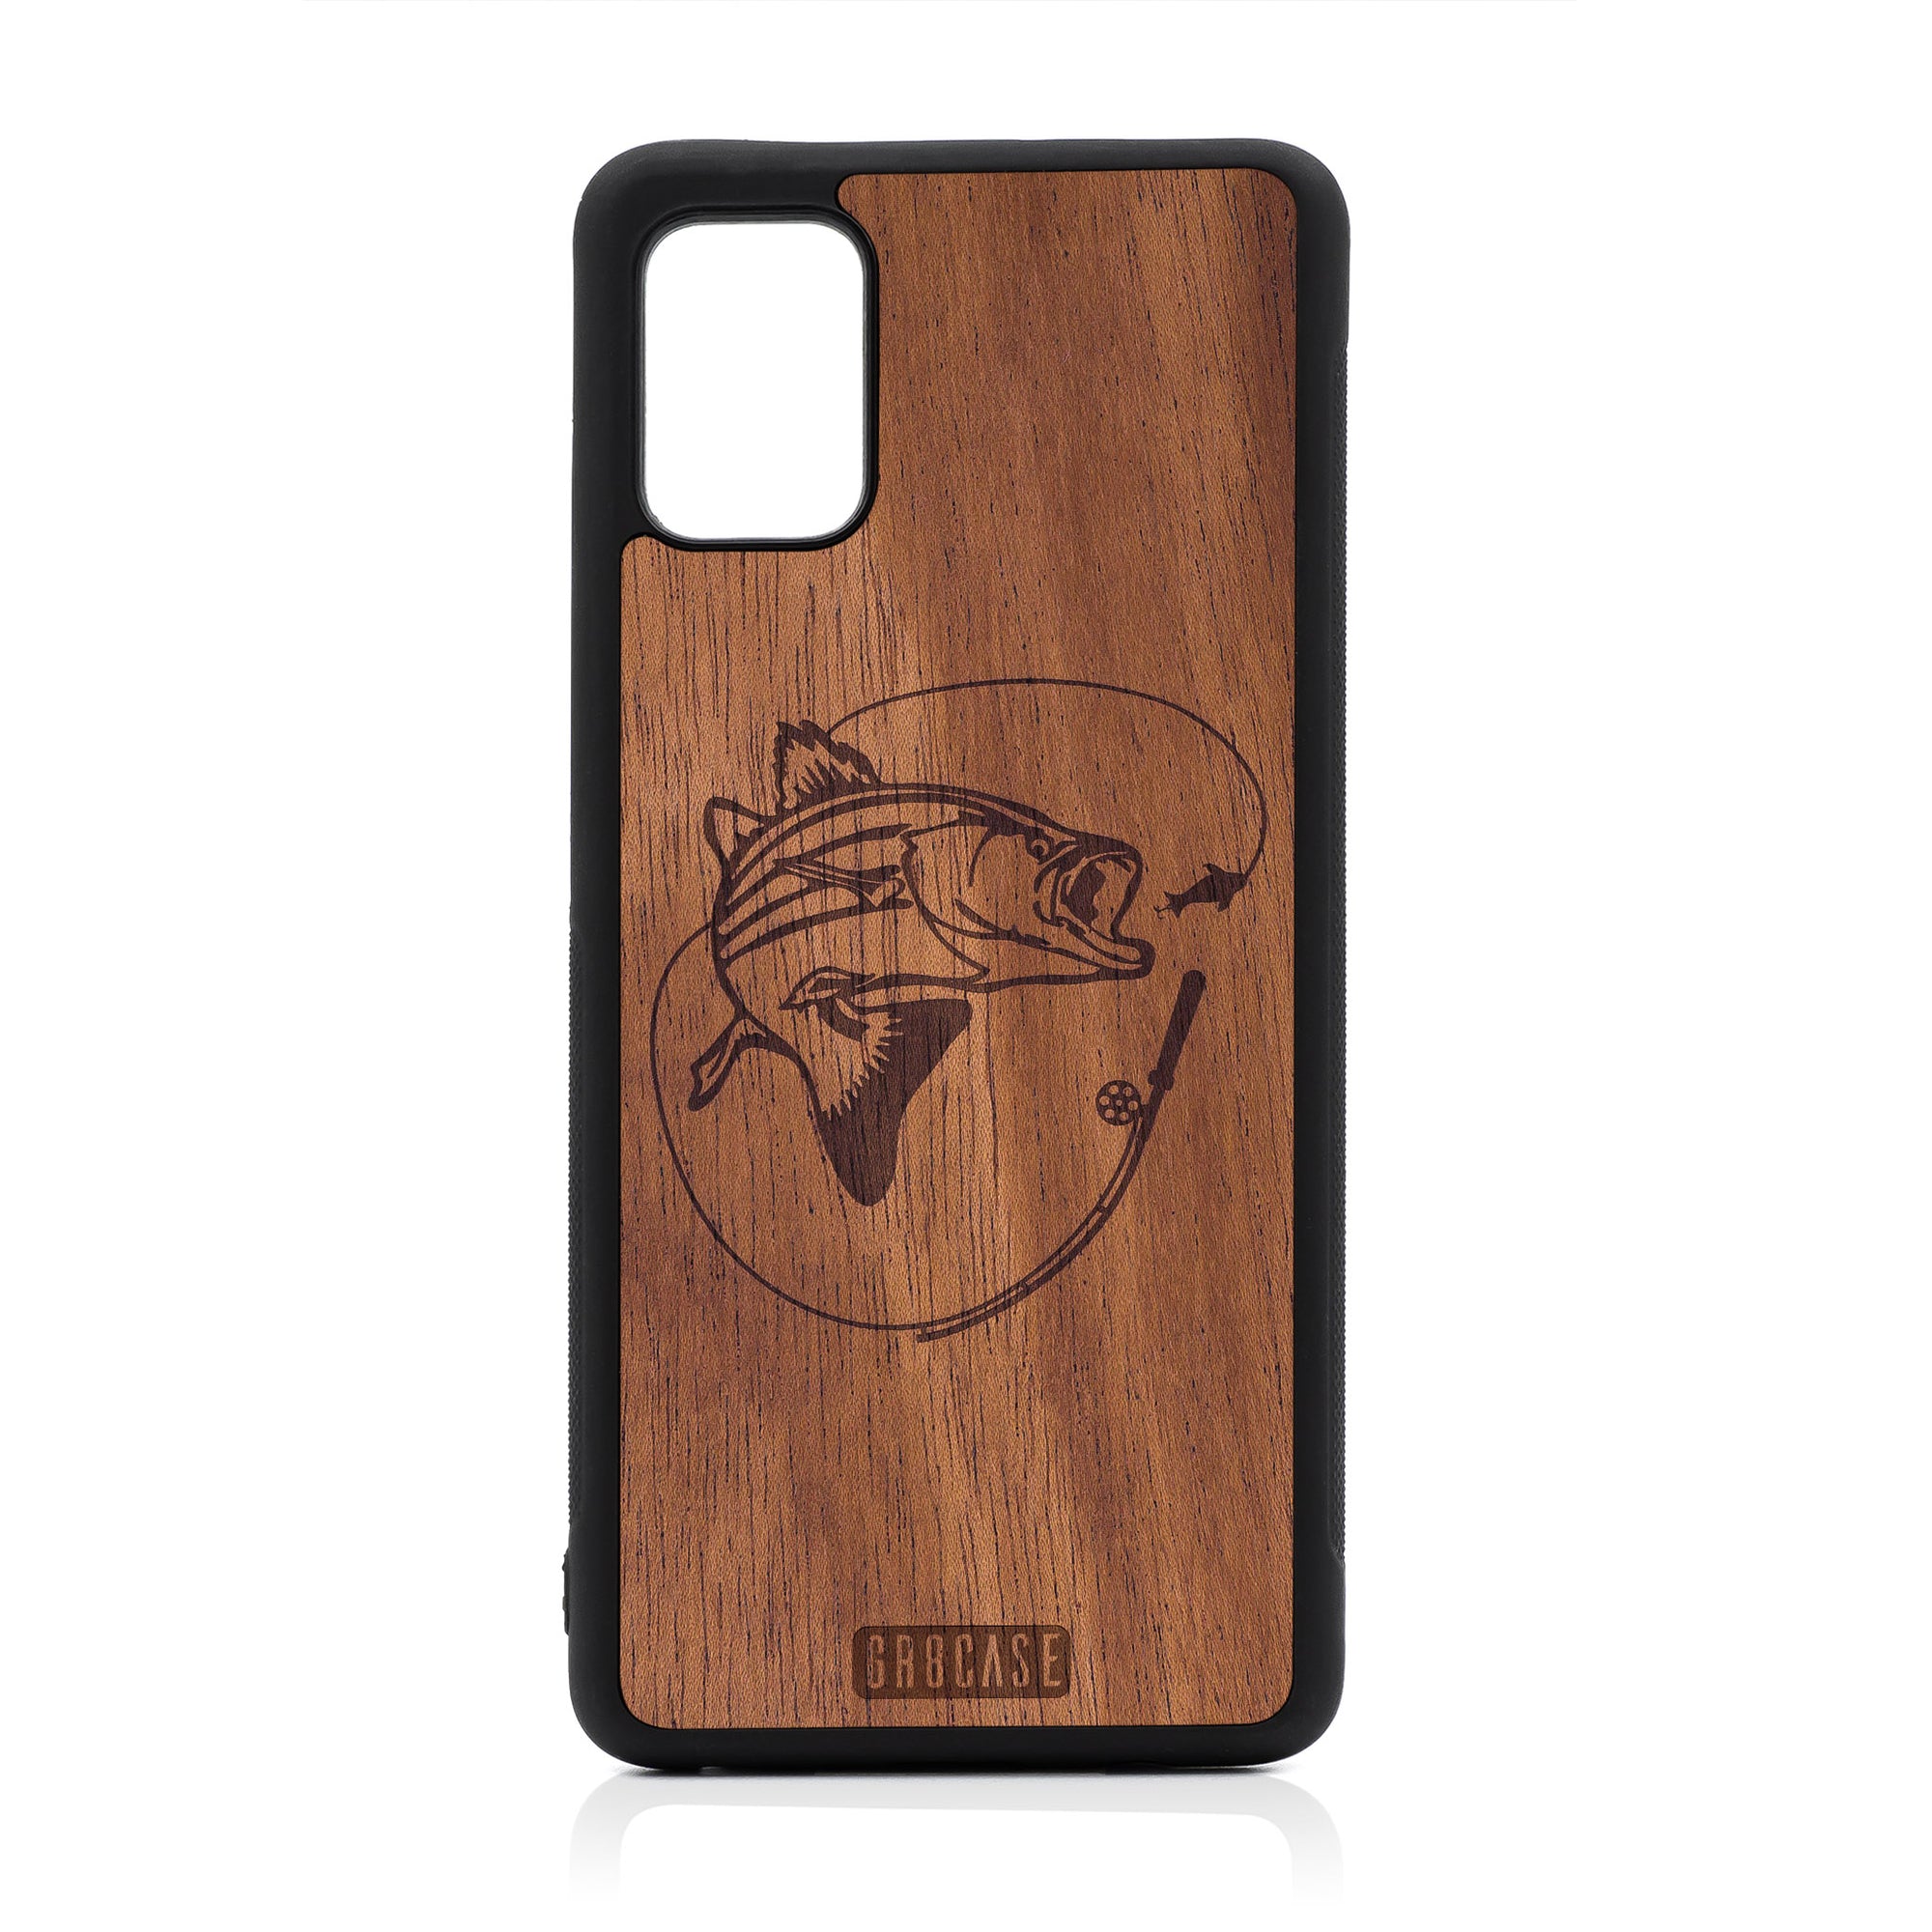 Fish and Reel Design Wood Case For Samsung Galaxy A51